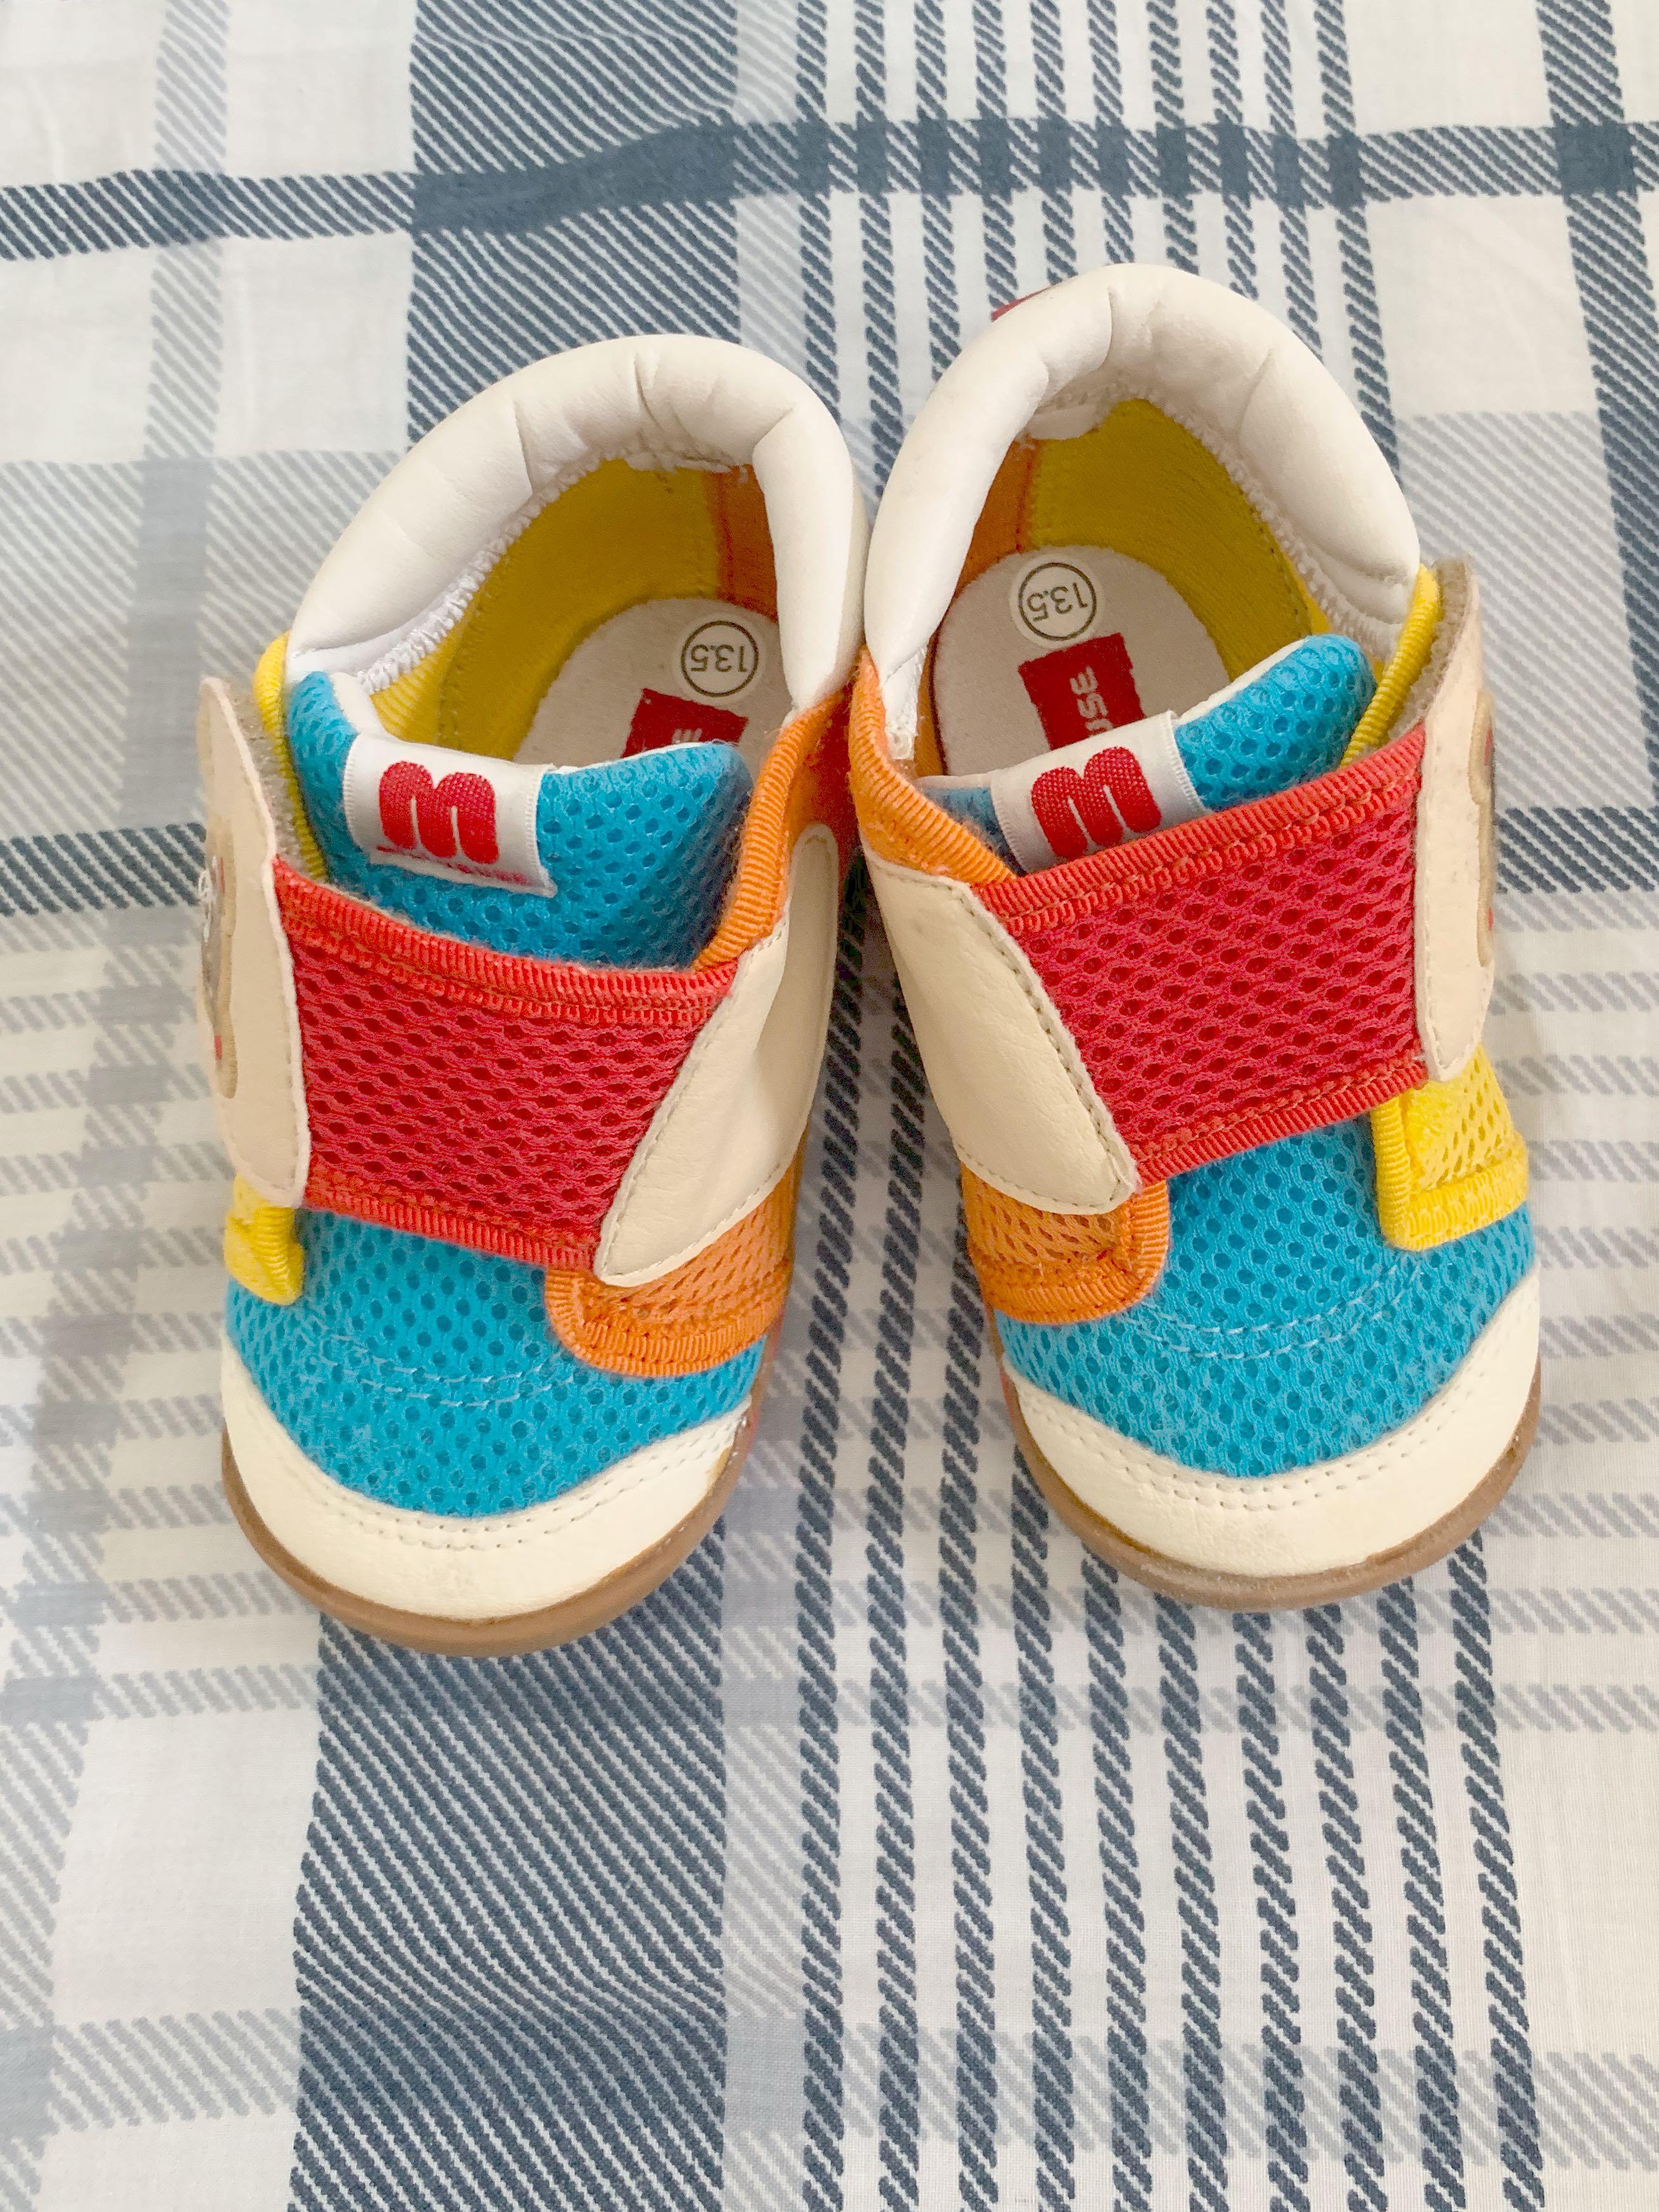 Mikihouse baby shoes 13.5cm, Babies 